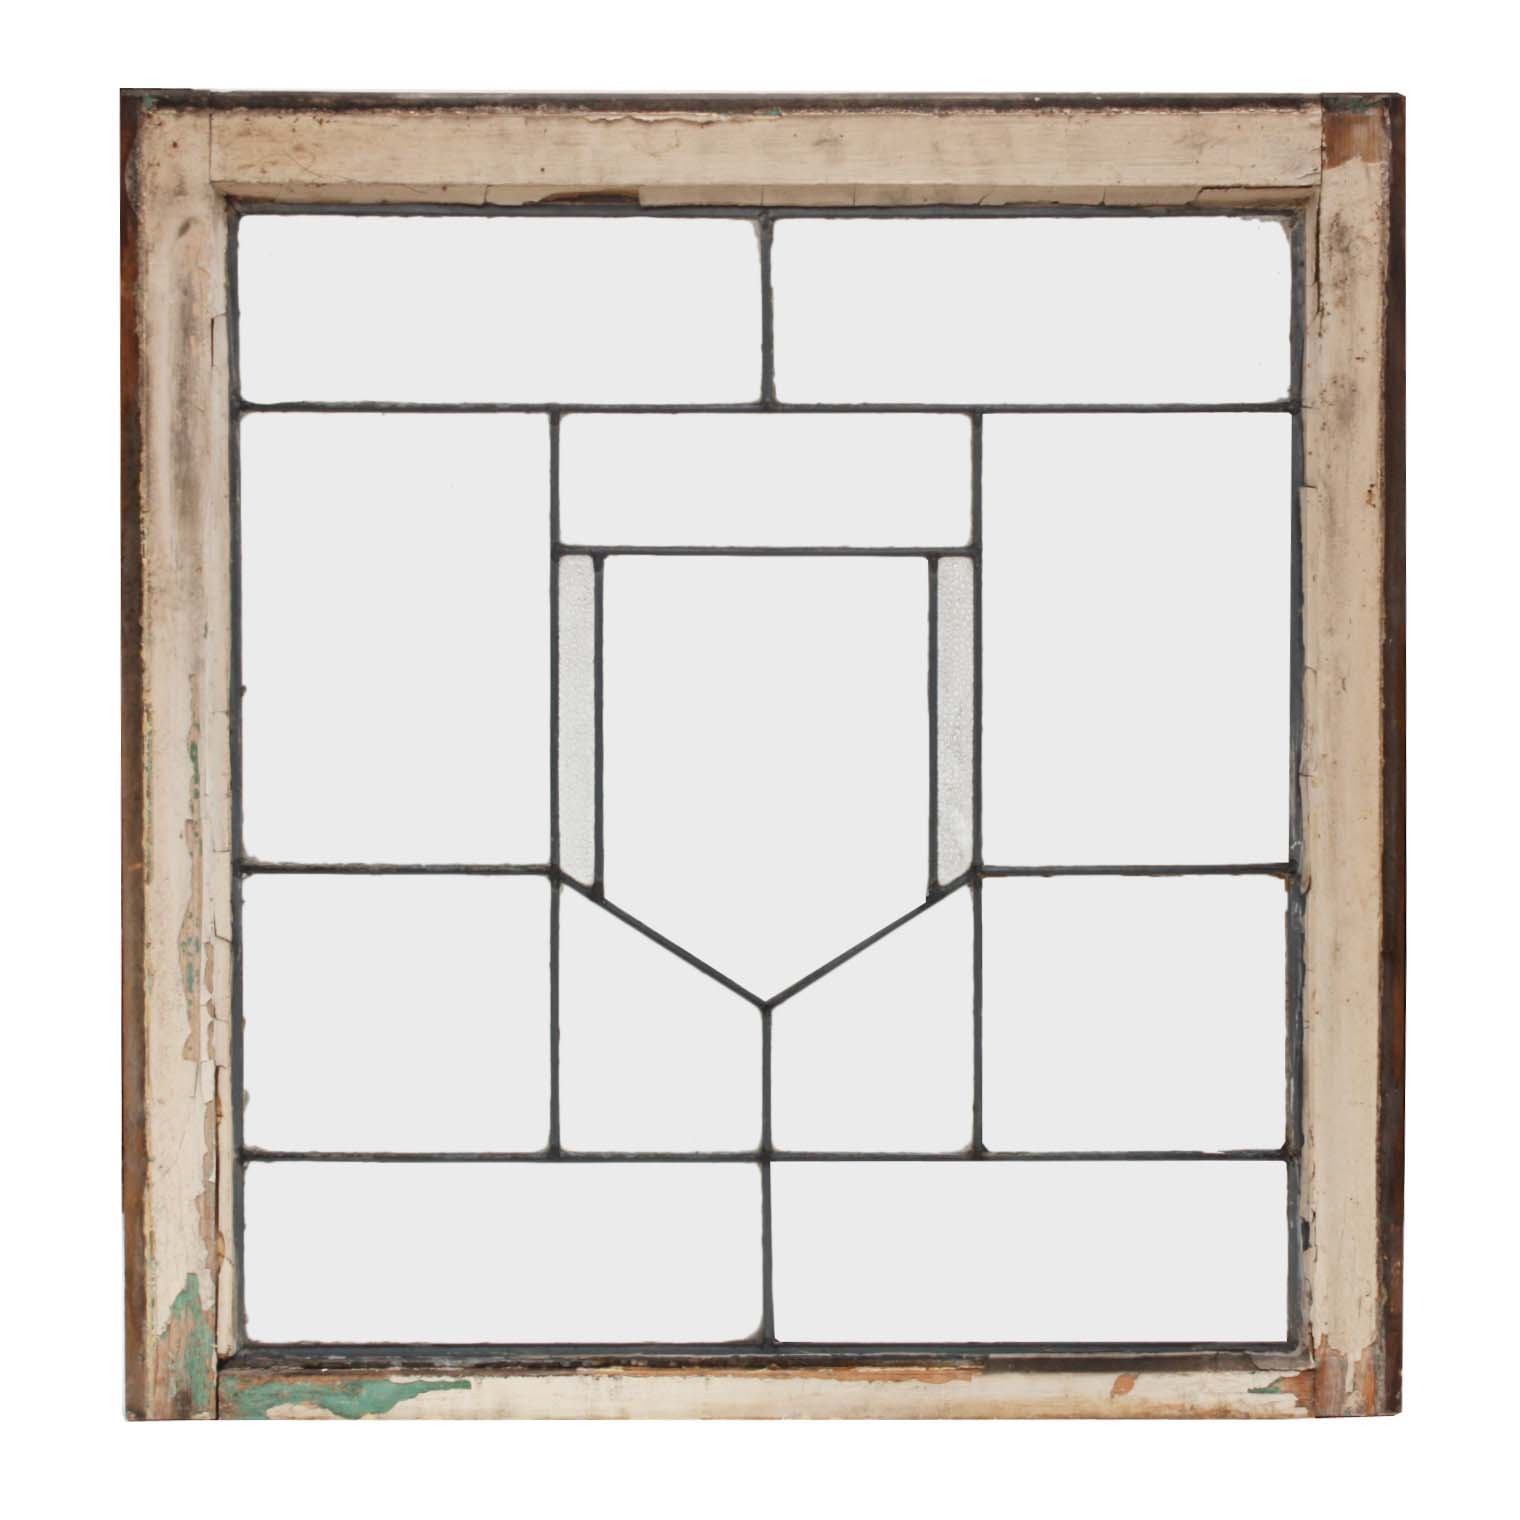 Antique Arts & Crafts American Leaded Glass Windows-58465